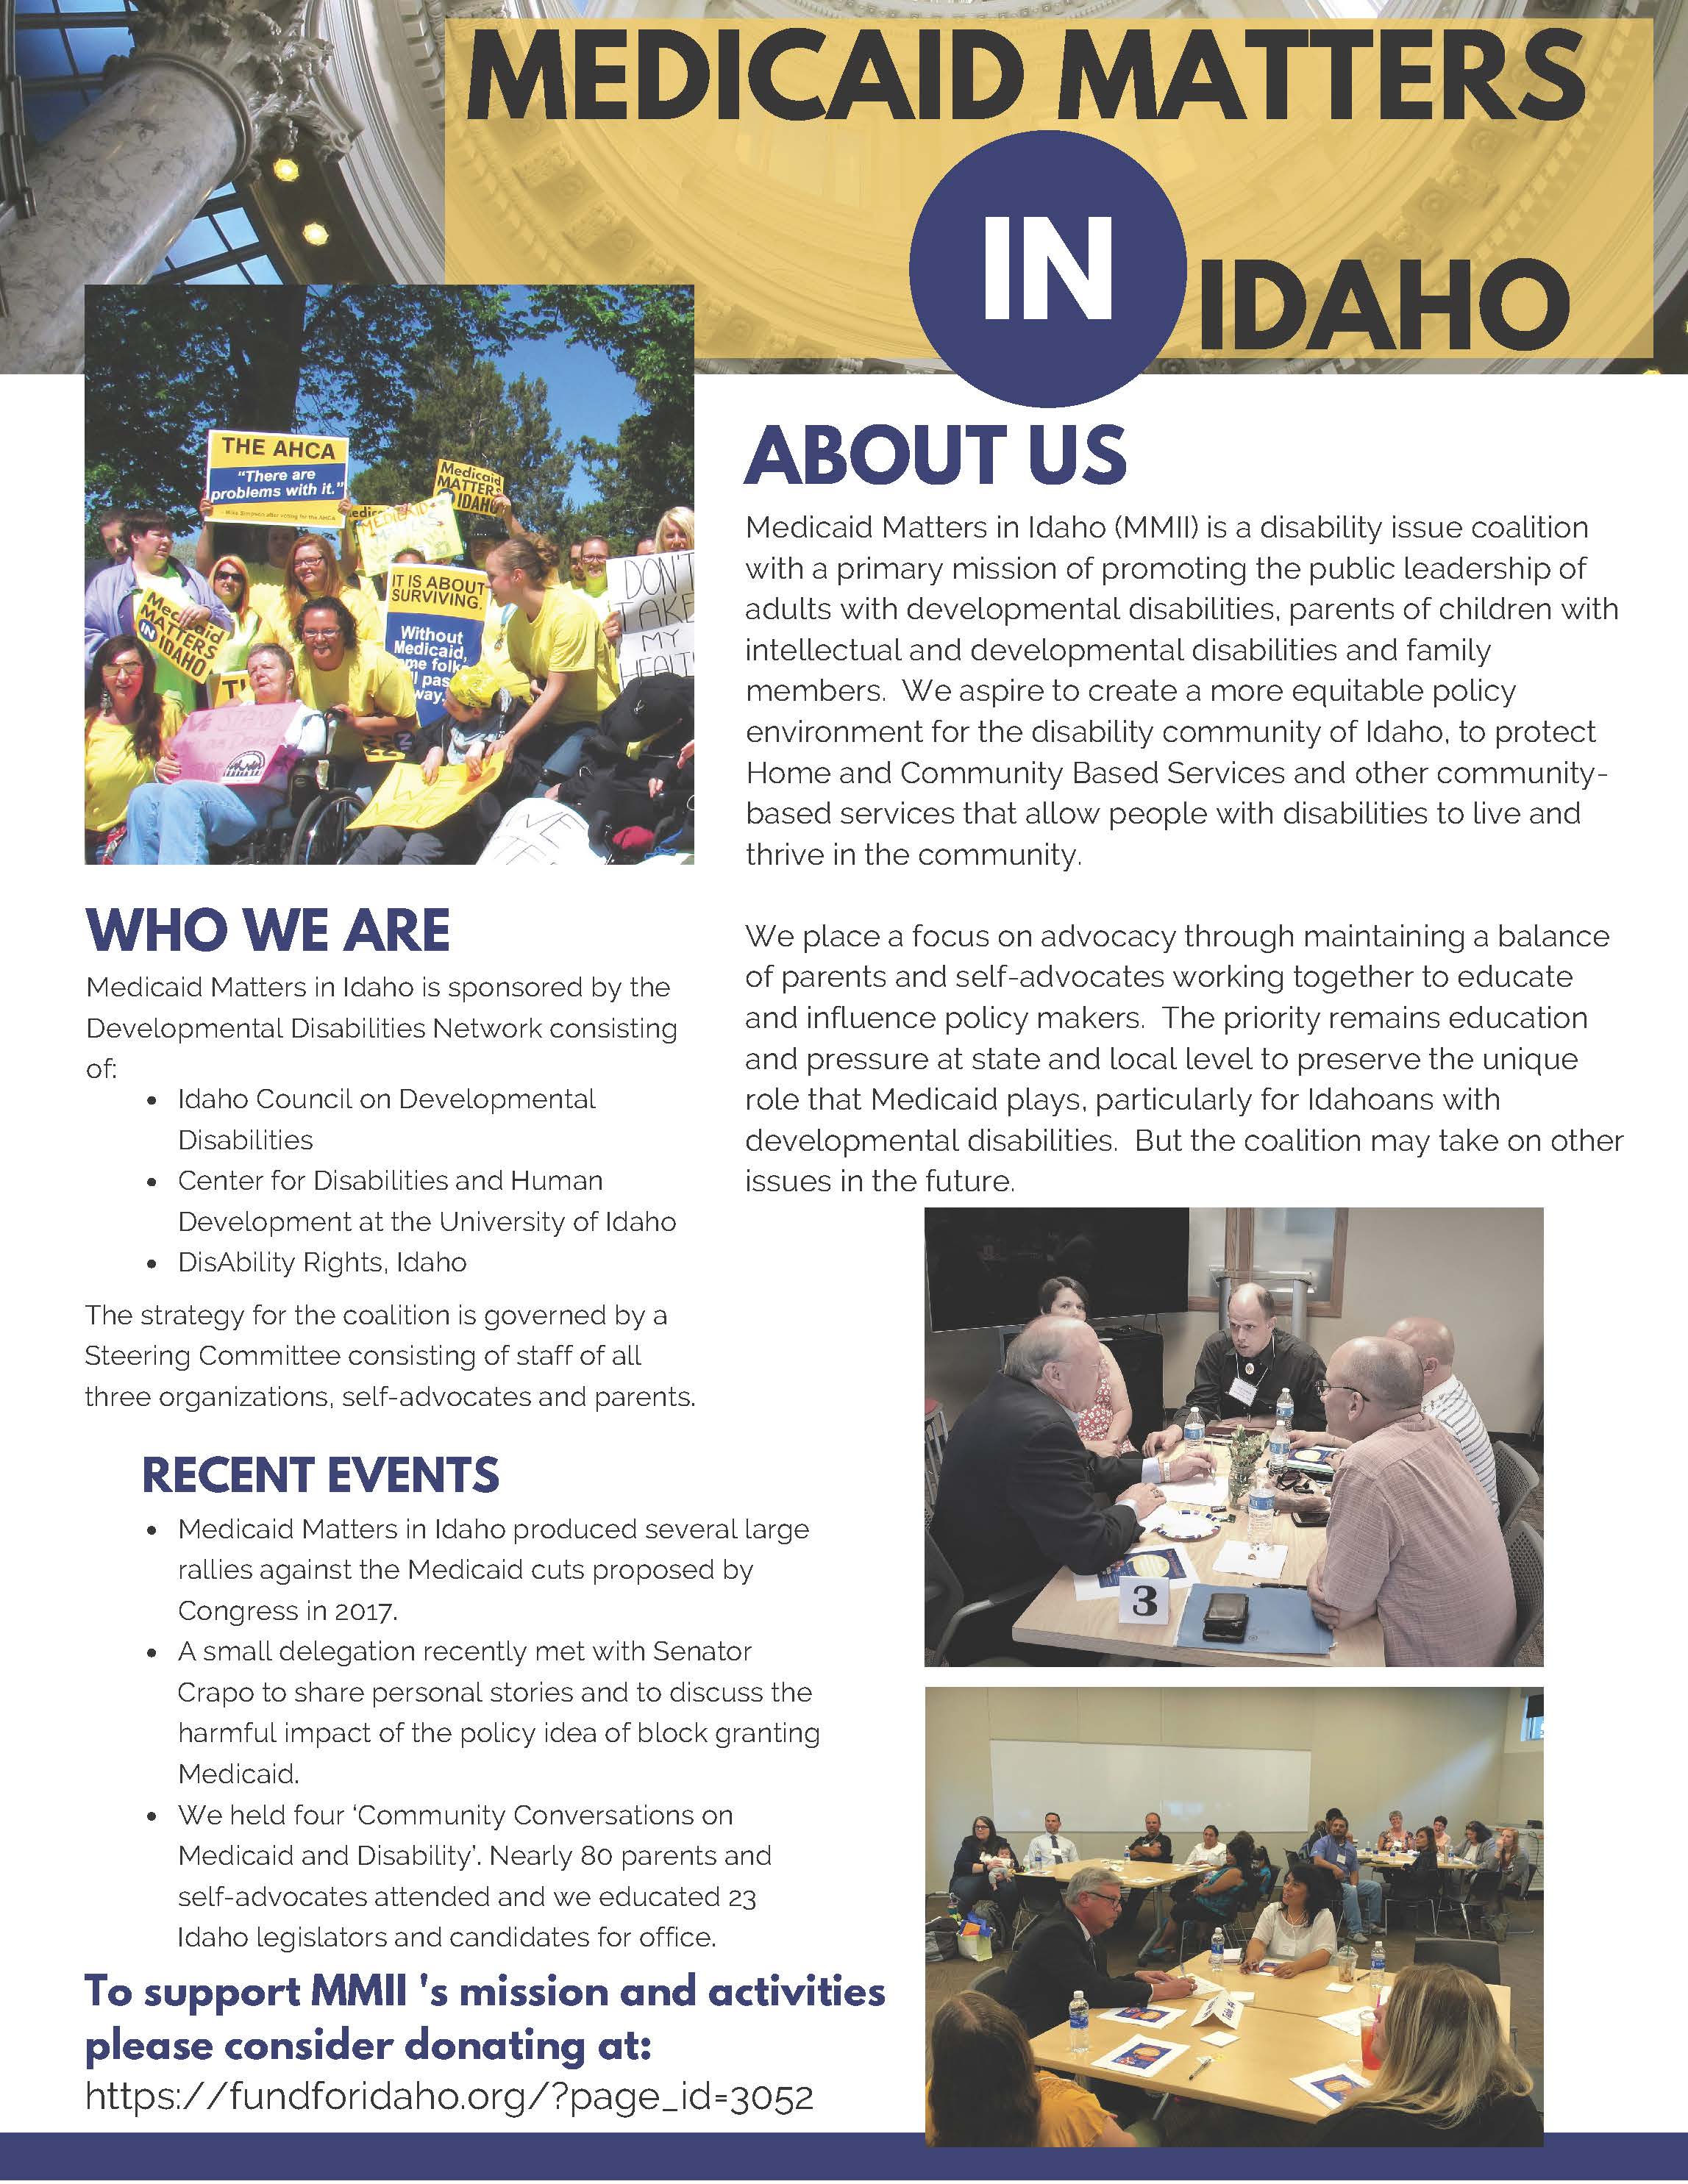 Flier with information about the Medicaid Matters in Idaho disability advocacy coalition.